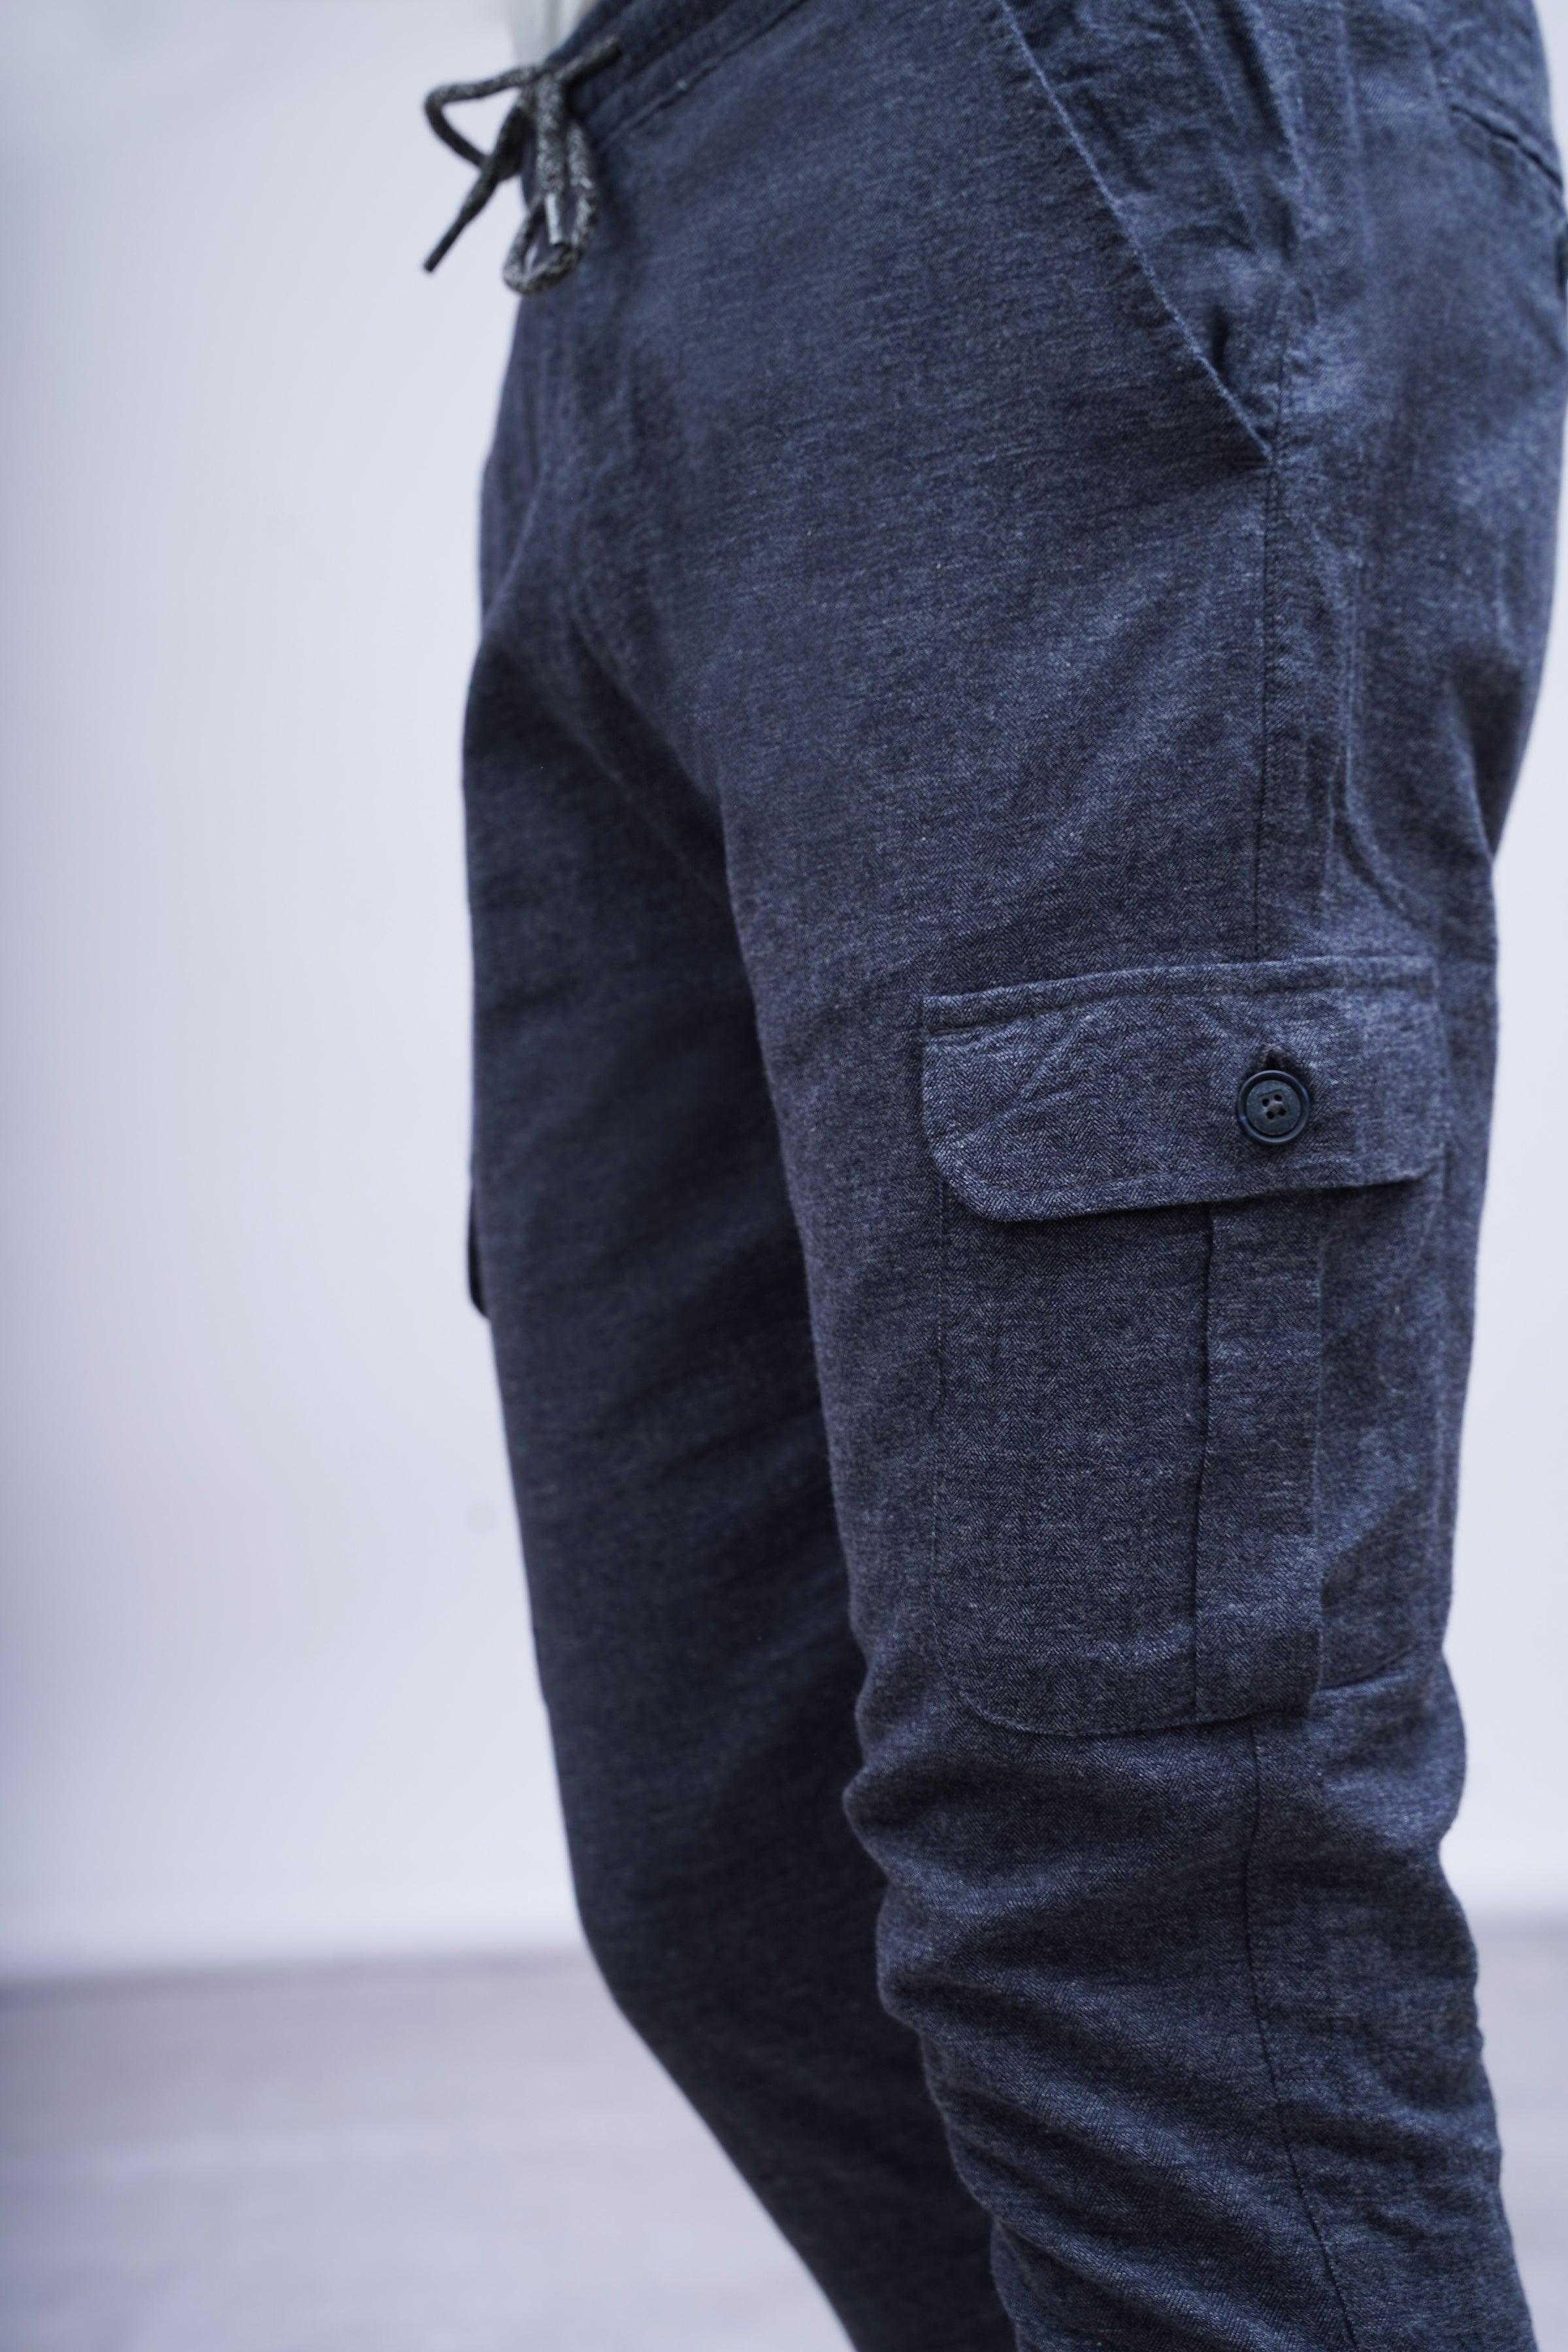 CASUAL JOGGER TROUSER BLUE GREY at Charcoal Clothing